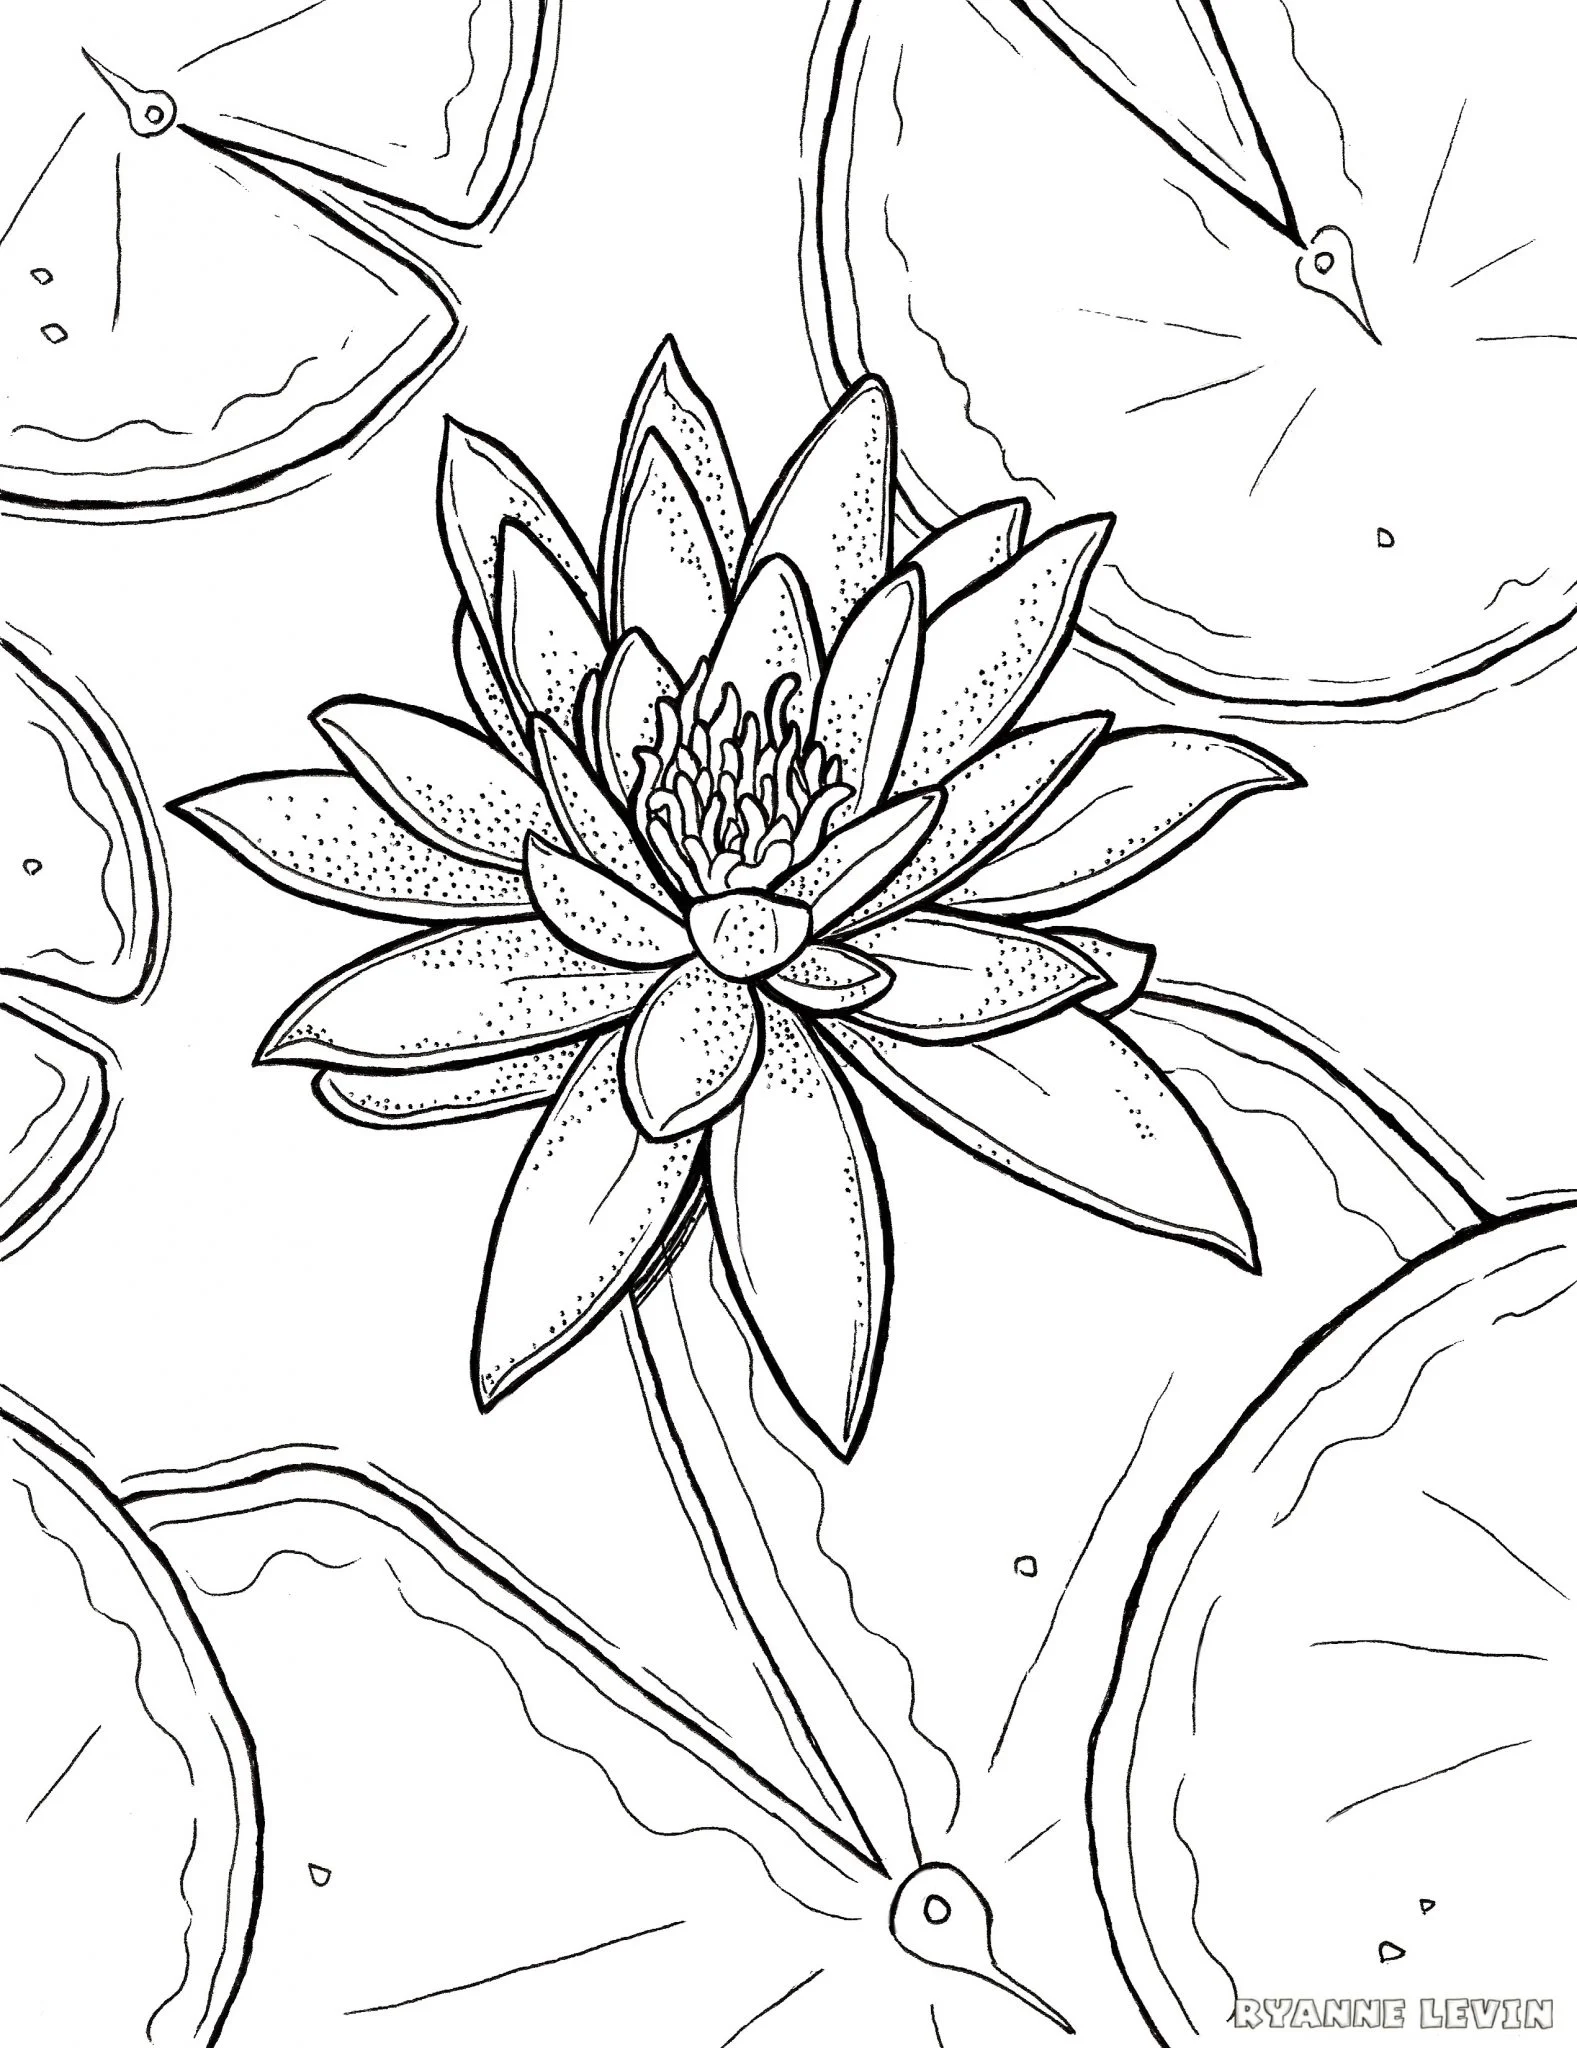 https://ryannelevin.com/wp-content/uploads/2016/01/waterlily-coloring-page-e1452894139864.jpg.webp